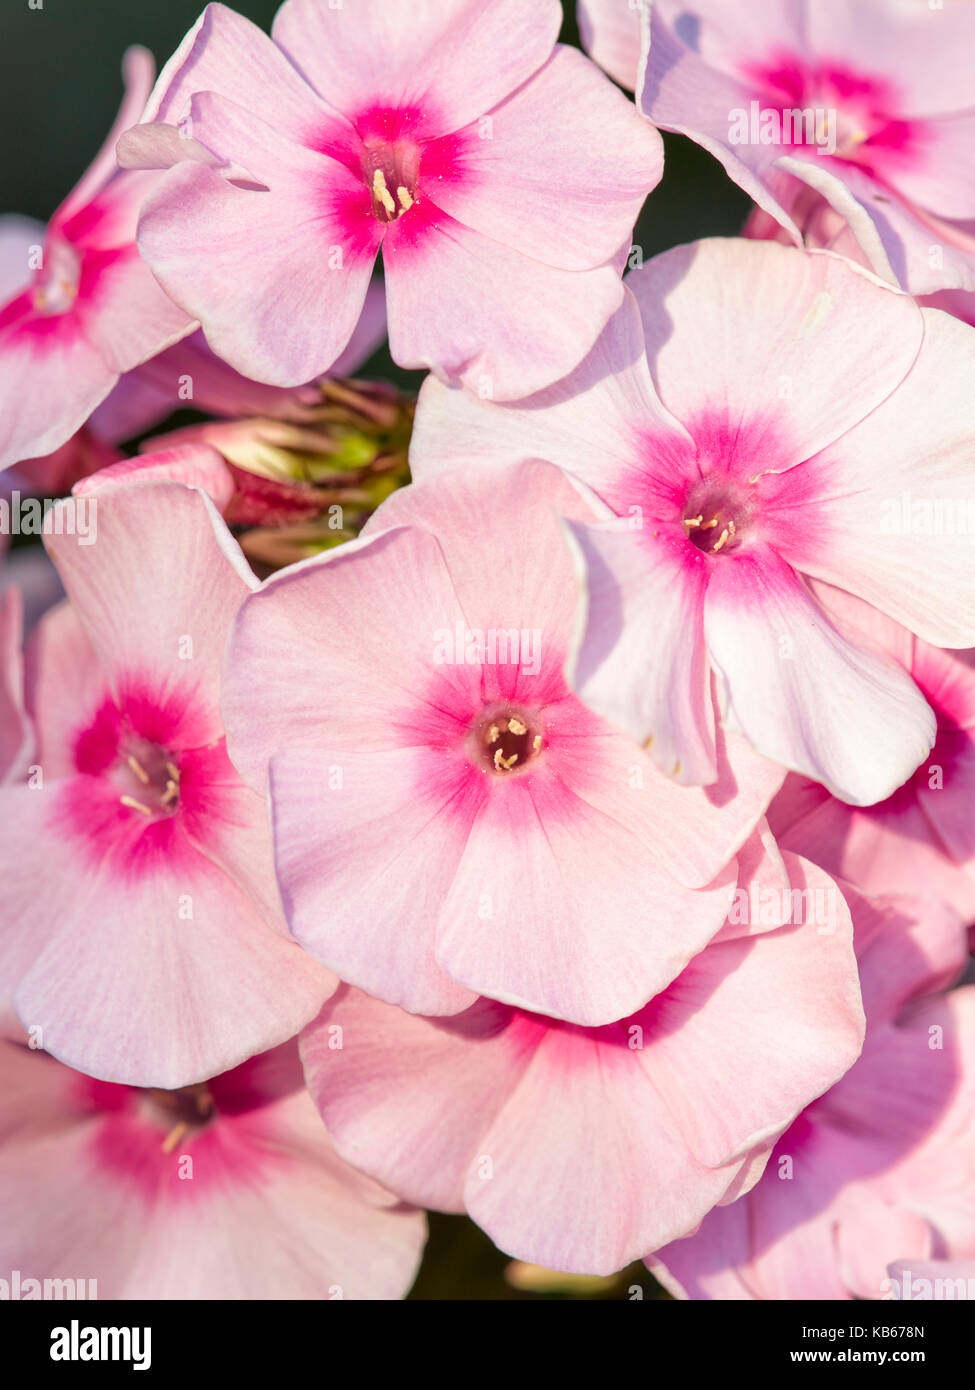 Close up of pink phlox flowers growing in garden. Scientific name: Phlox paniculata. Stock Photo